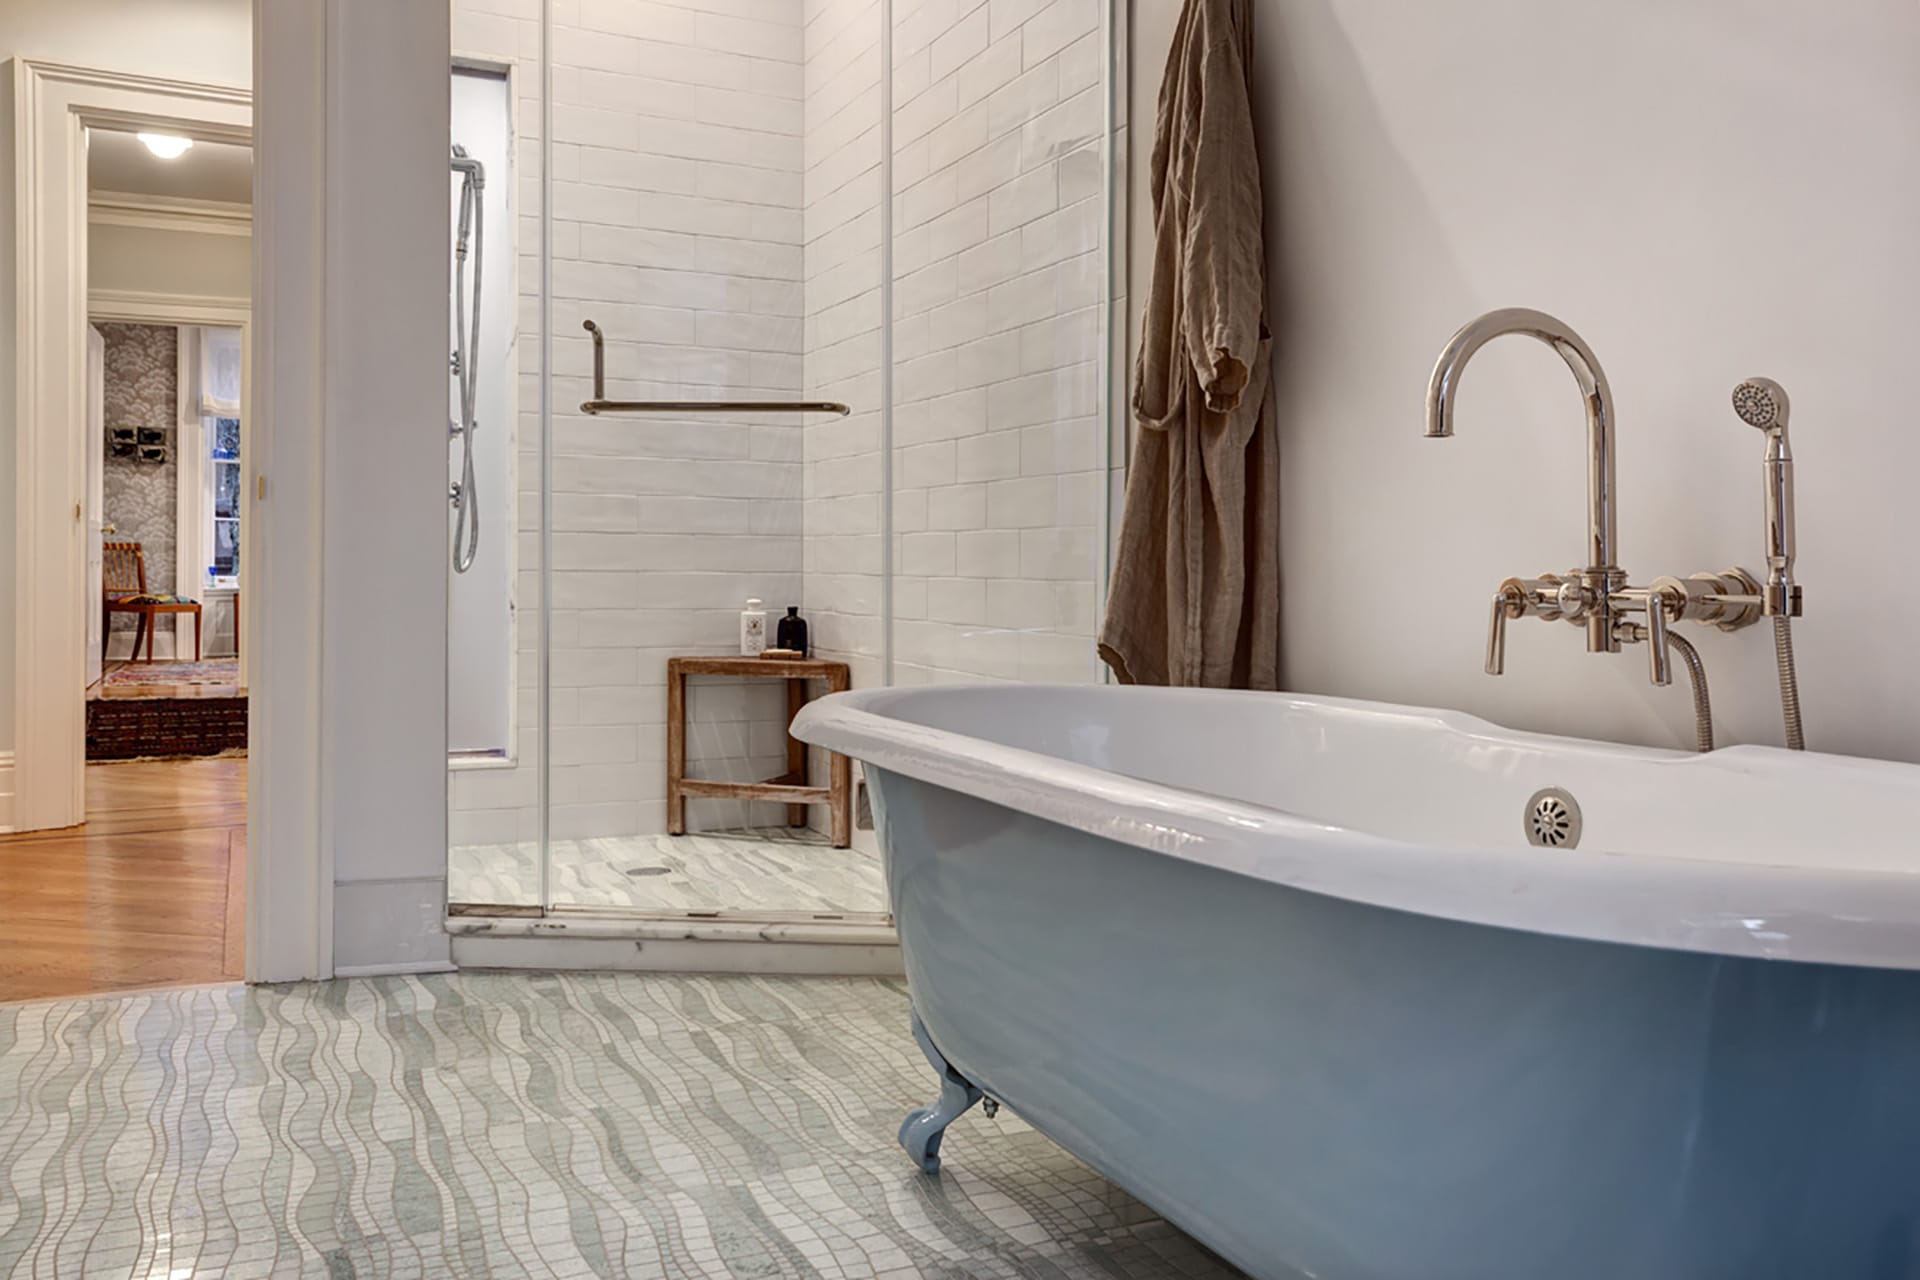 Blue clawfoot tub in the foreground of a primary bathroom with tiled floors and a shower stall.